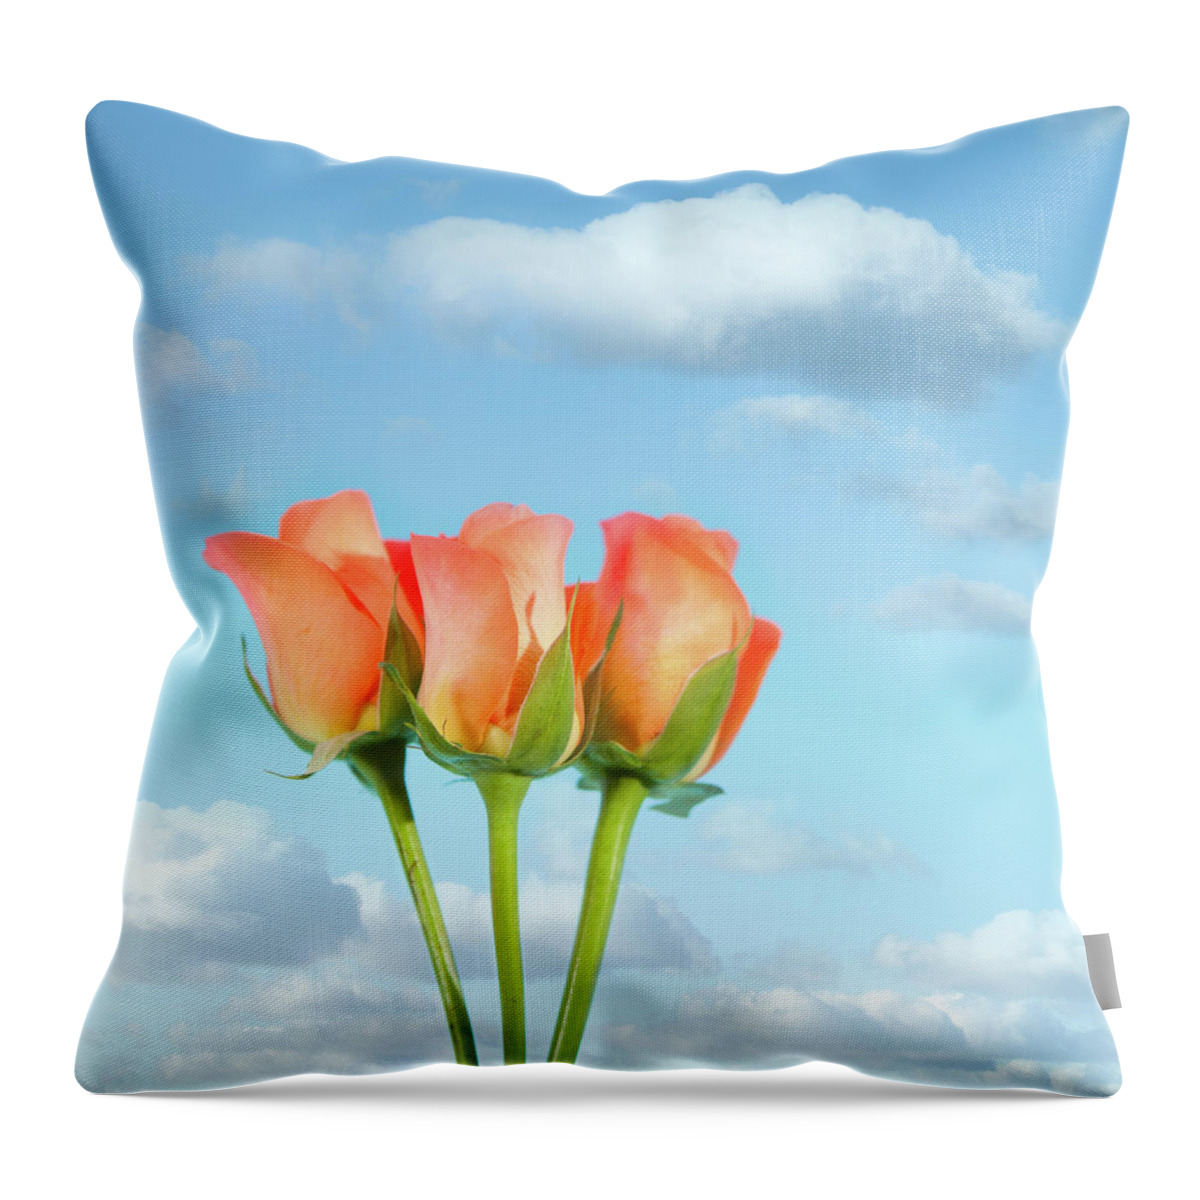 Orange Color Throw Pillow featuring the photograph Three Roses by Peter Chadwick Lrps